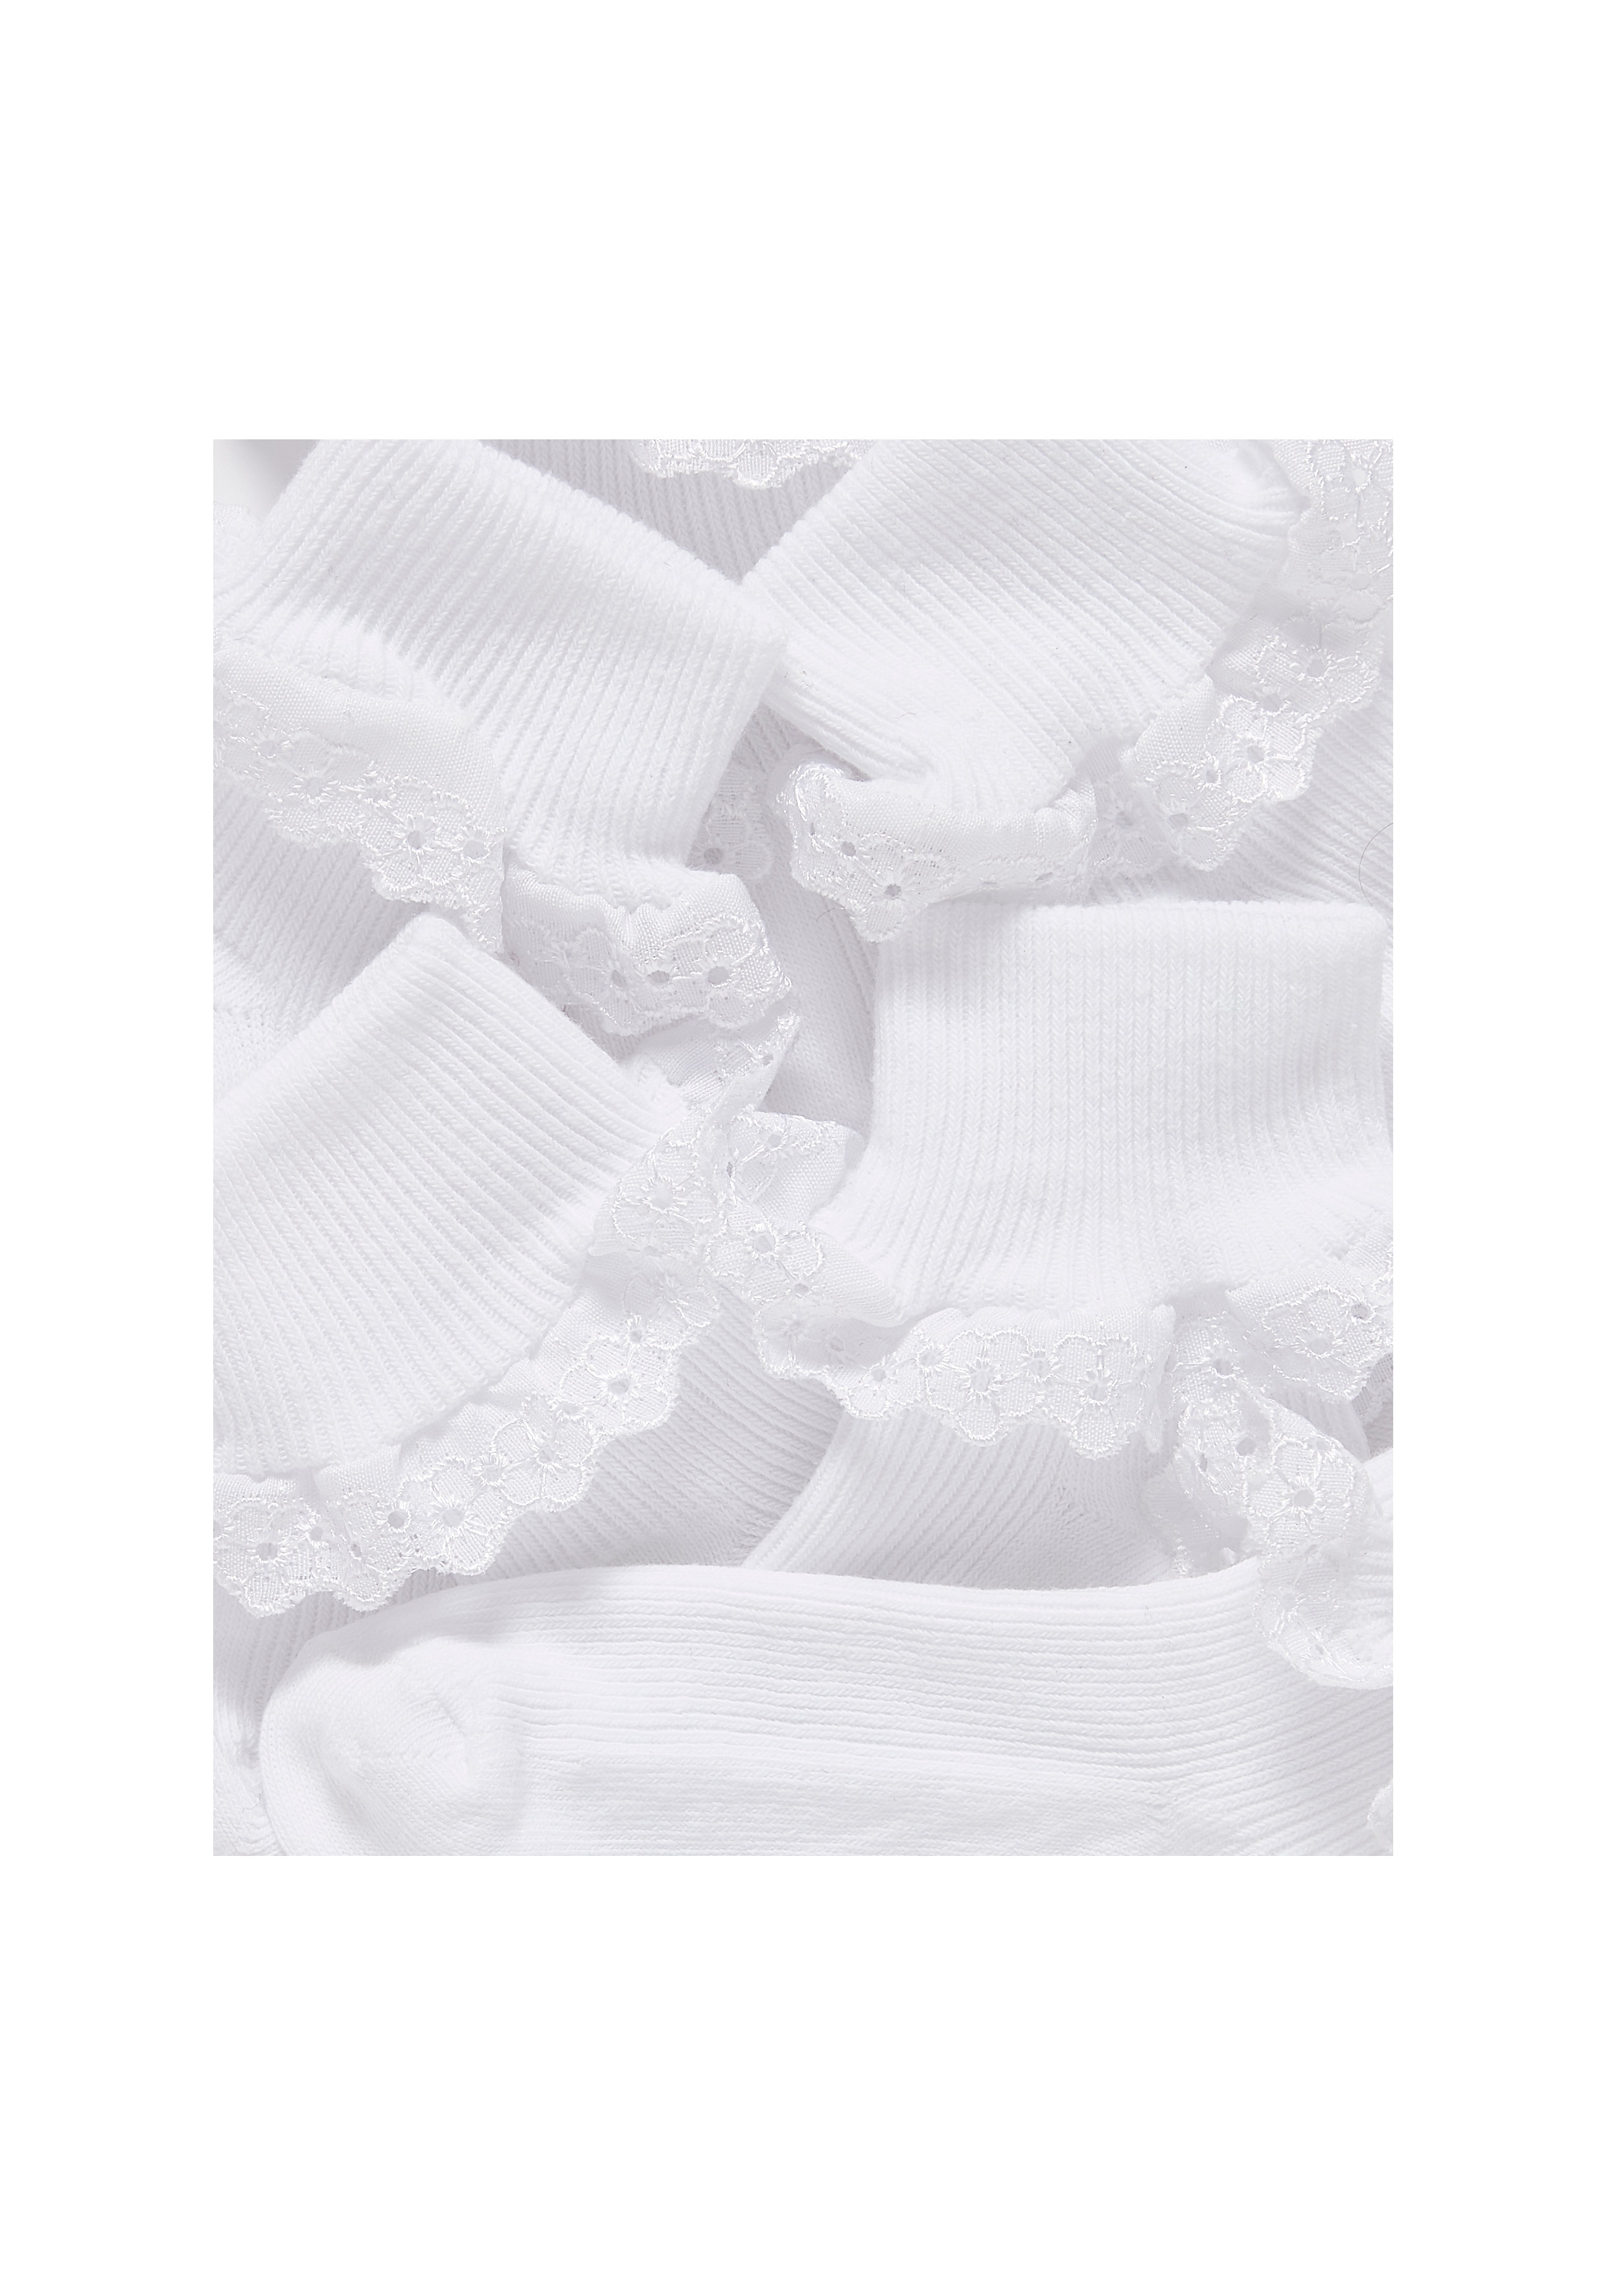 Mothercare | Girls White Lace Turn - Over - Top Socks - 3 Pack - White 1